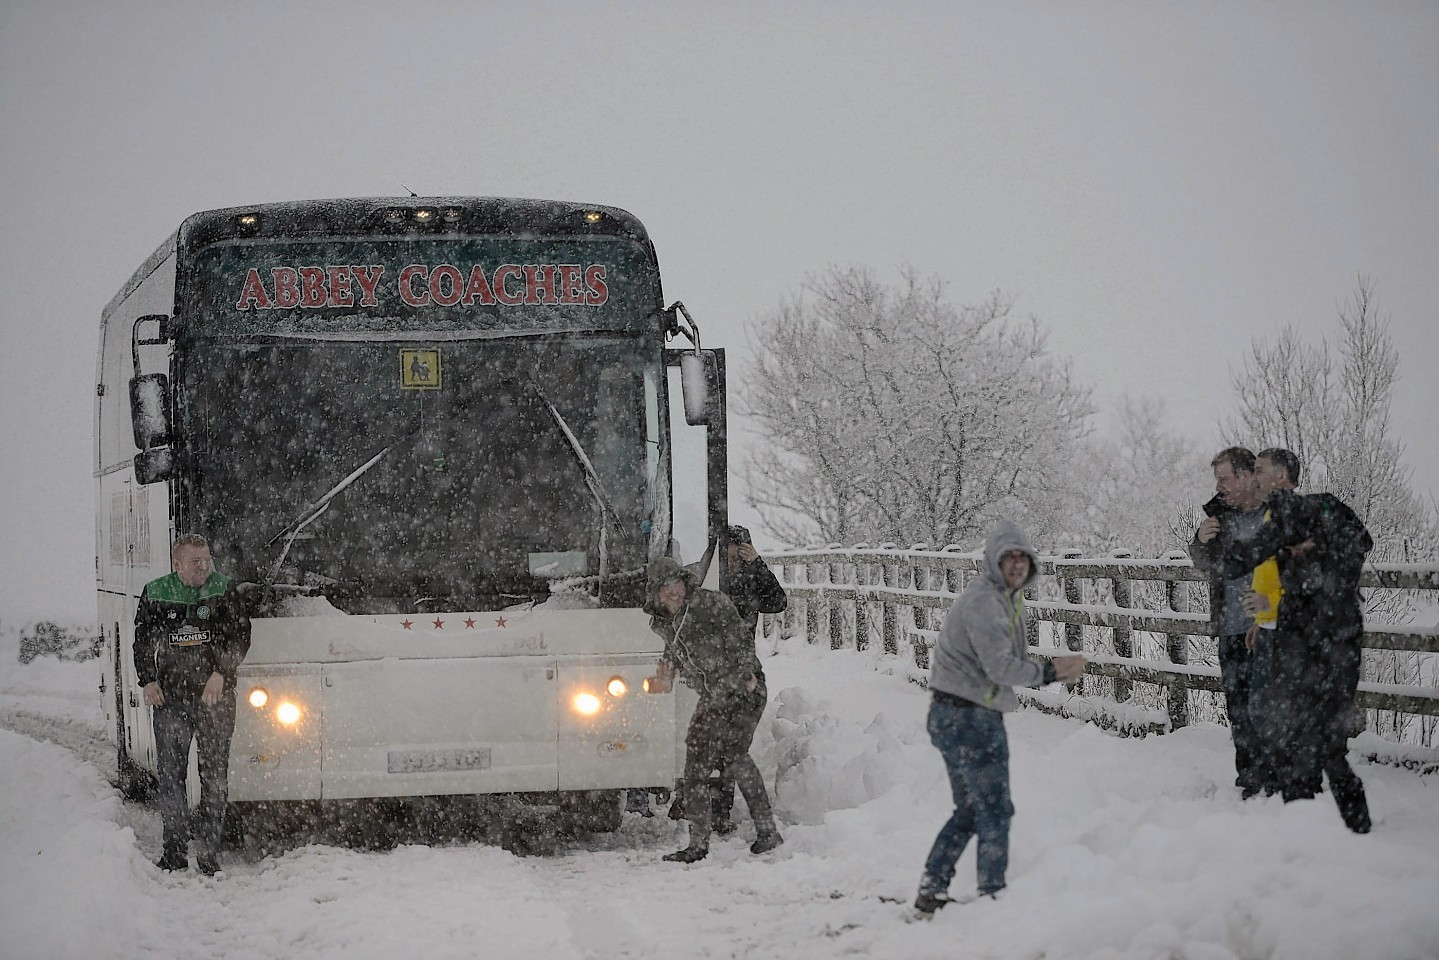 Celtic fans on their way to Inverness have a snow fight on the Drumochter pass 